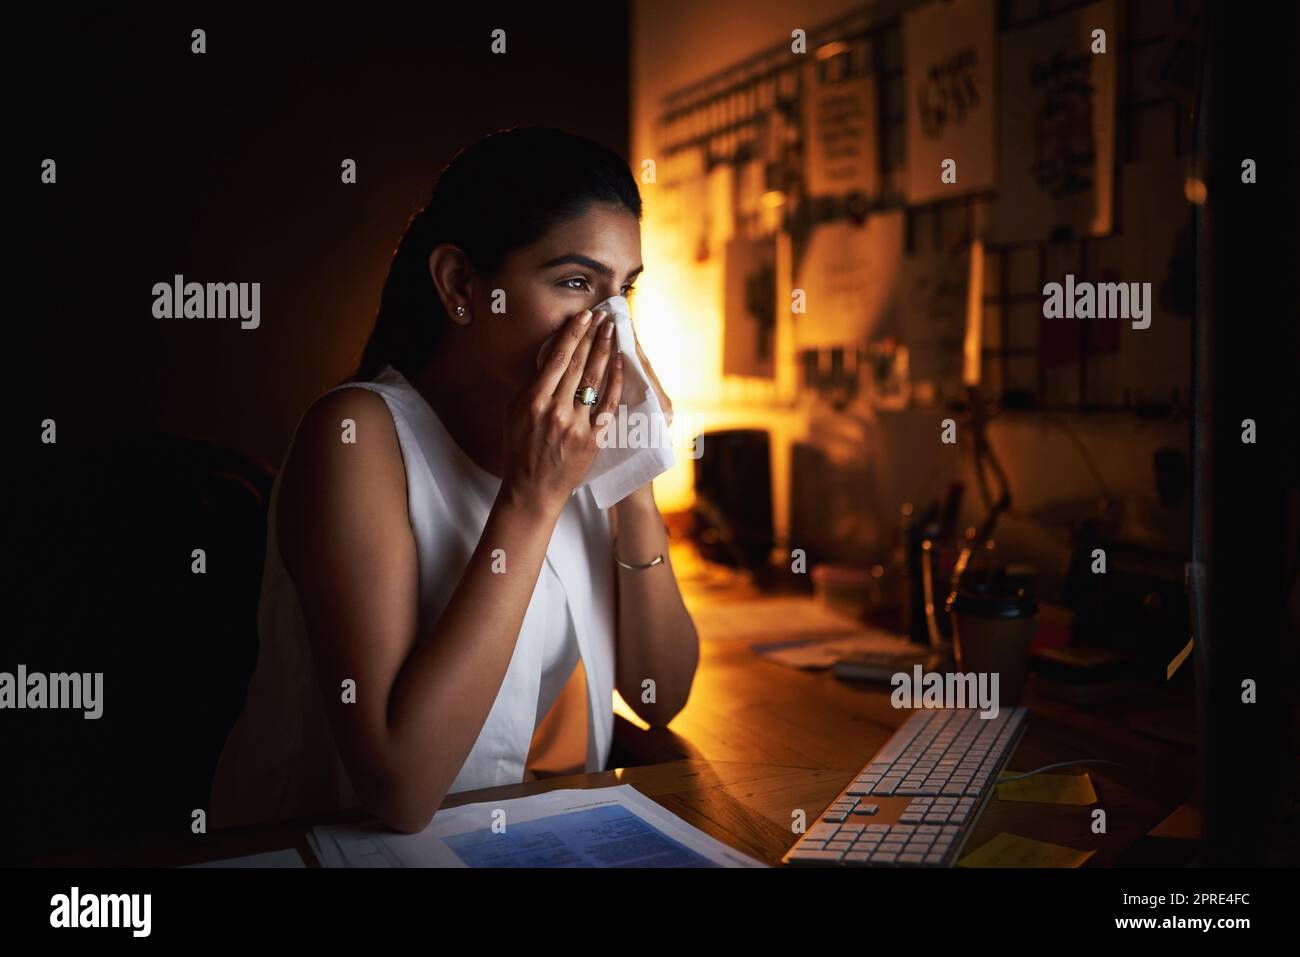 Pushing through her health concerns for the sake of success. a young businesswoman blowing her nose while working late in an office. Stock Photo